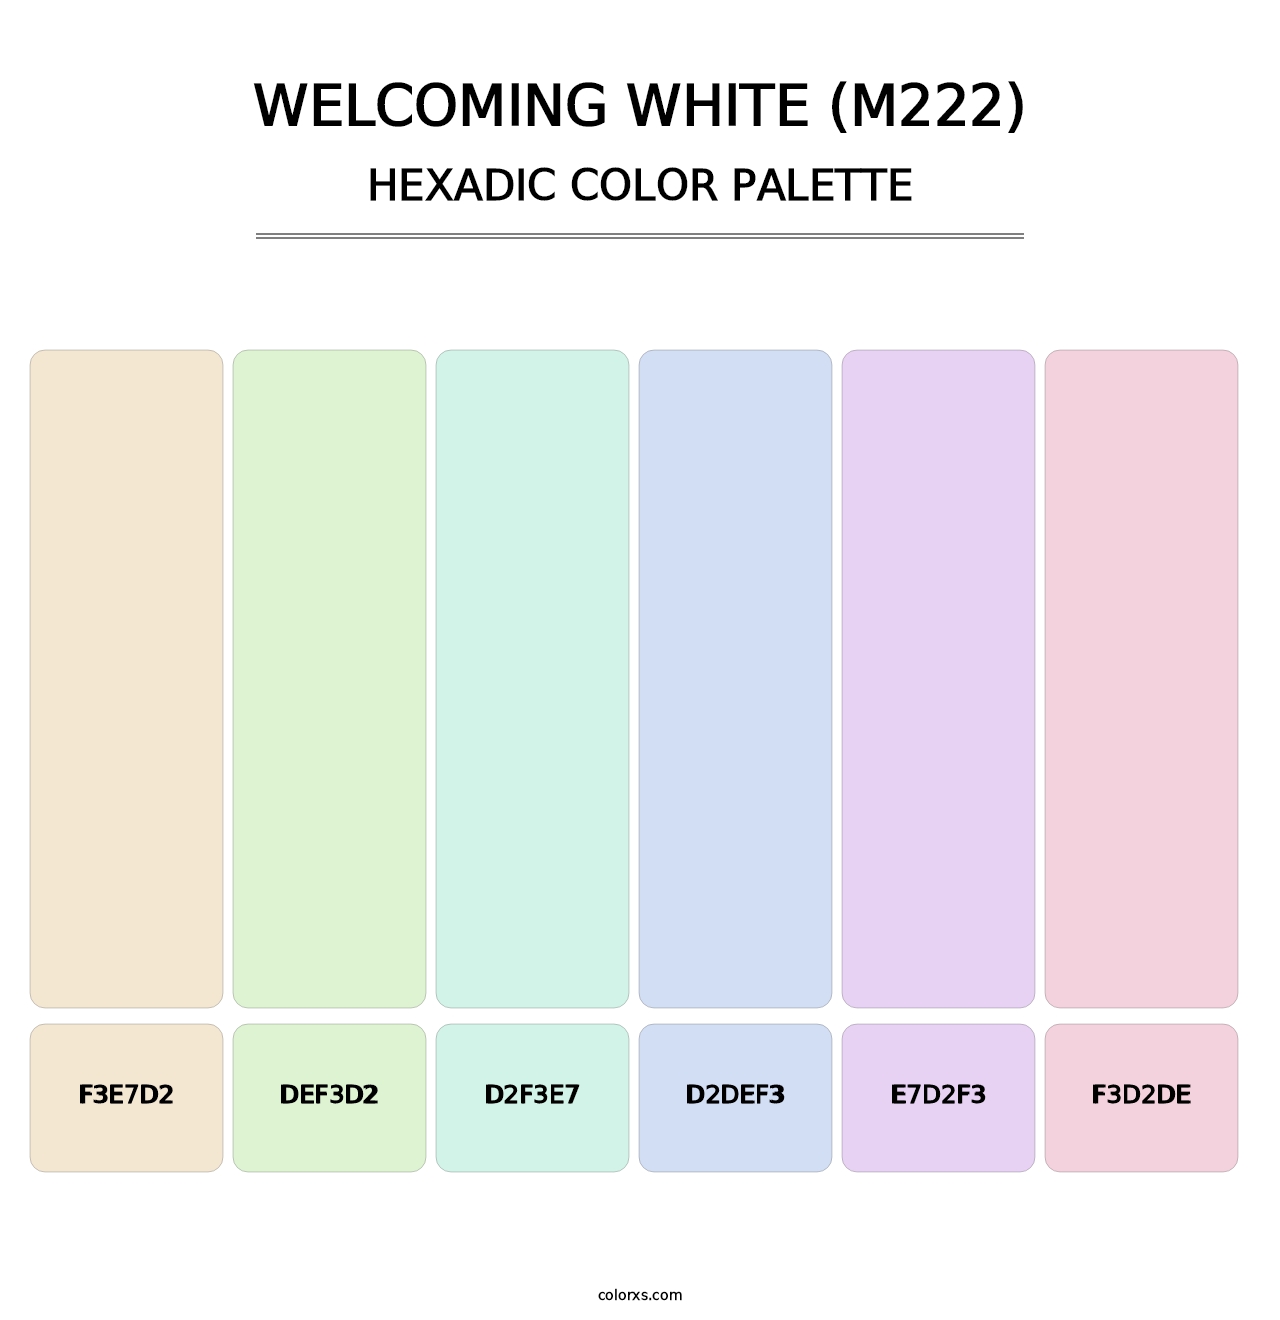 Welcoming White (M222) - Hexadic Color Palette